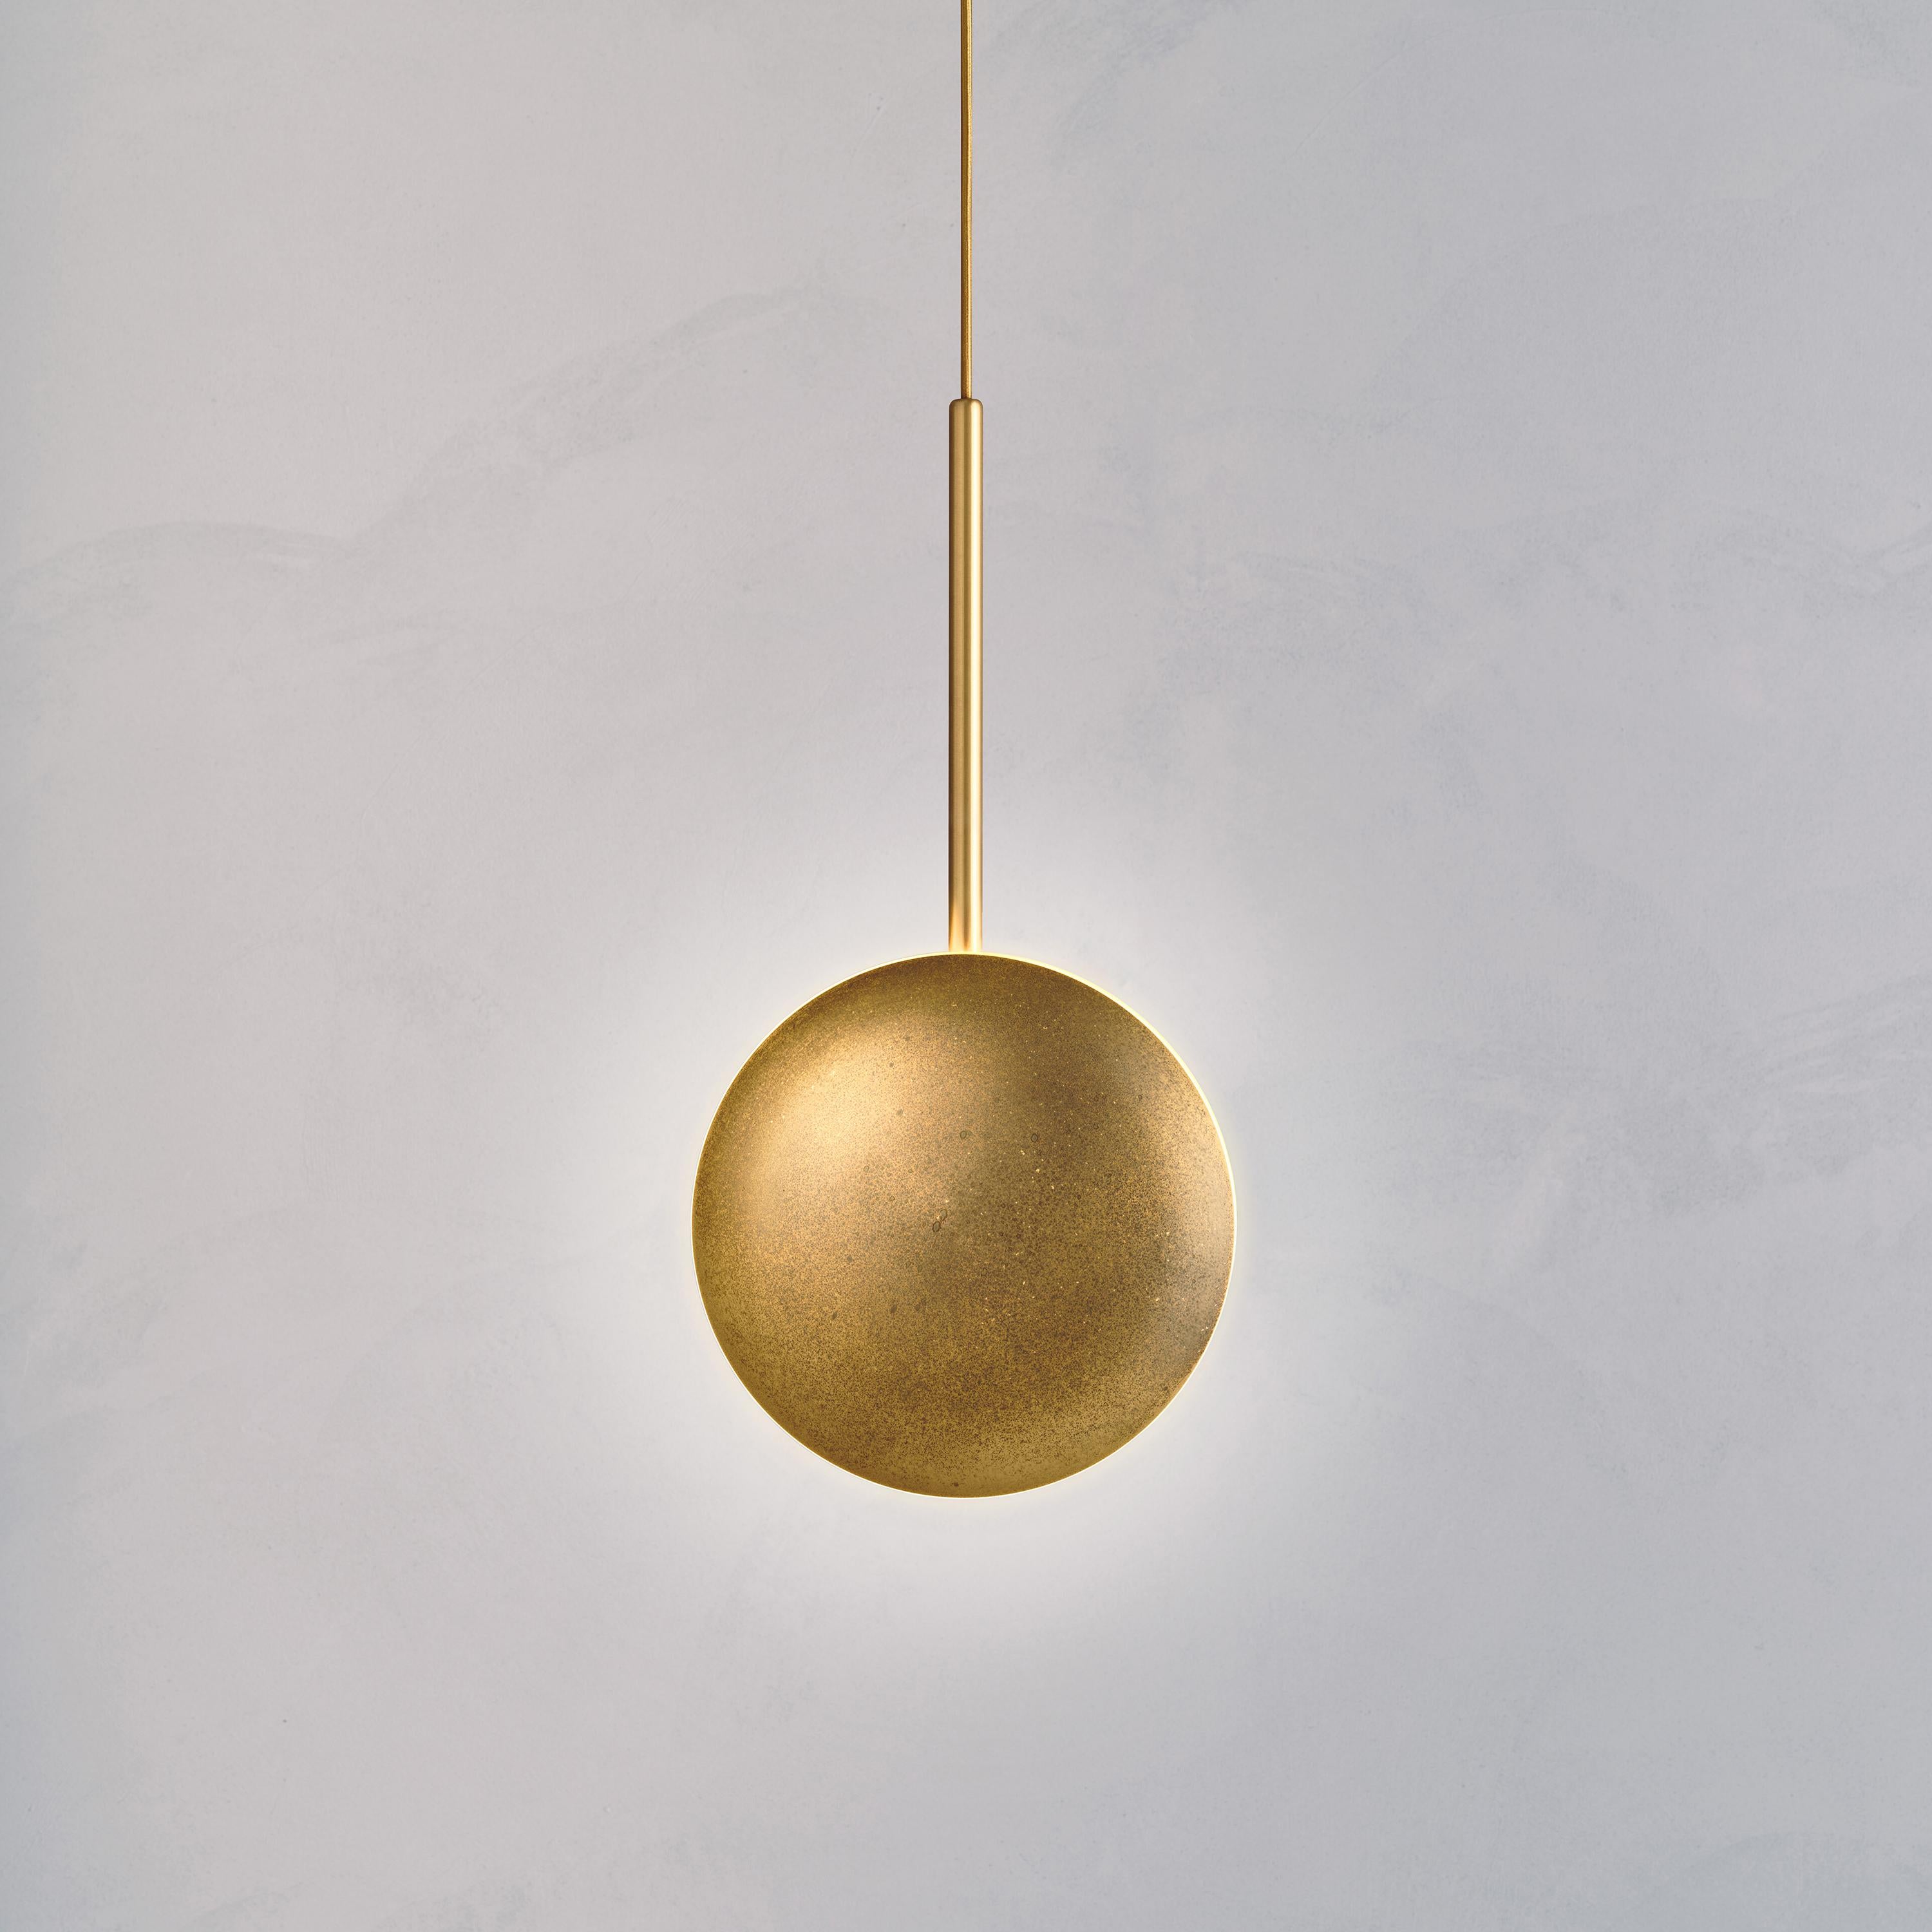 Named after the astronomical object that signals rebirth and new ideas, the ‘Comet’ pieces are achieved with skilful brass shaping and patina finishes that celebrate British metal artisanship.
 
Softly illuminated with integrated LED from within,